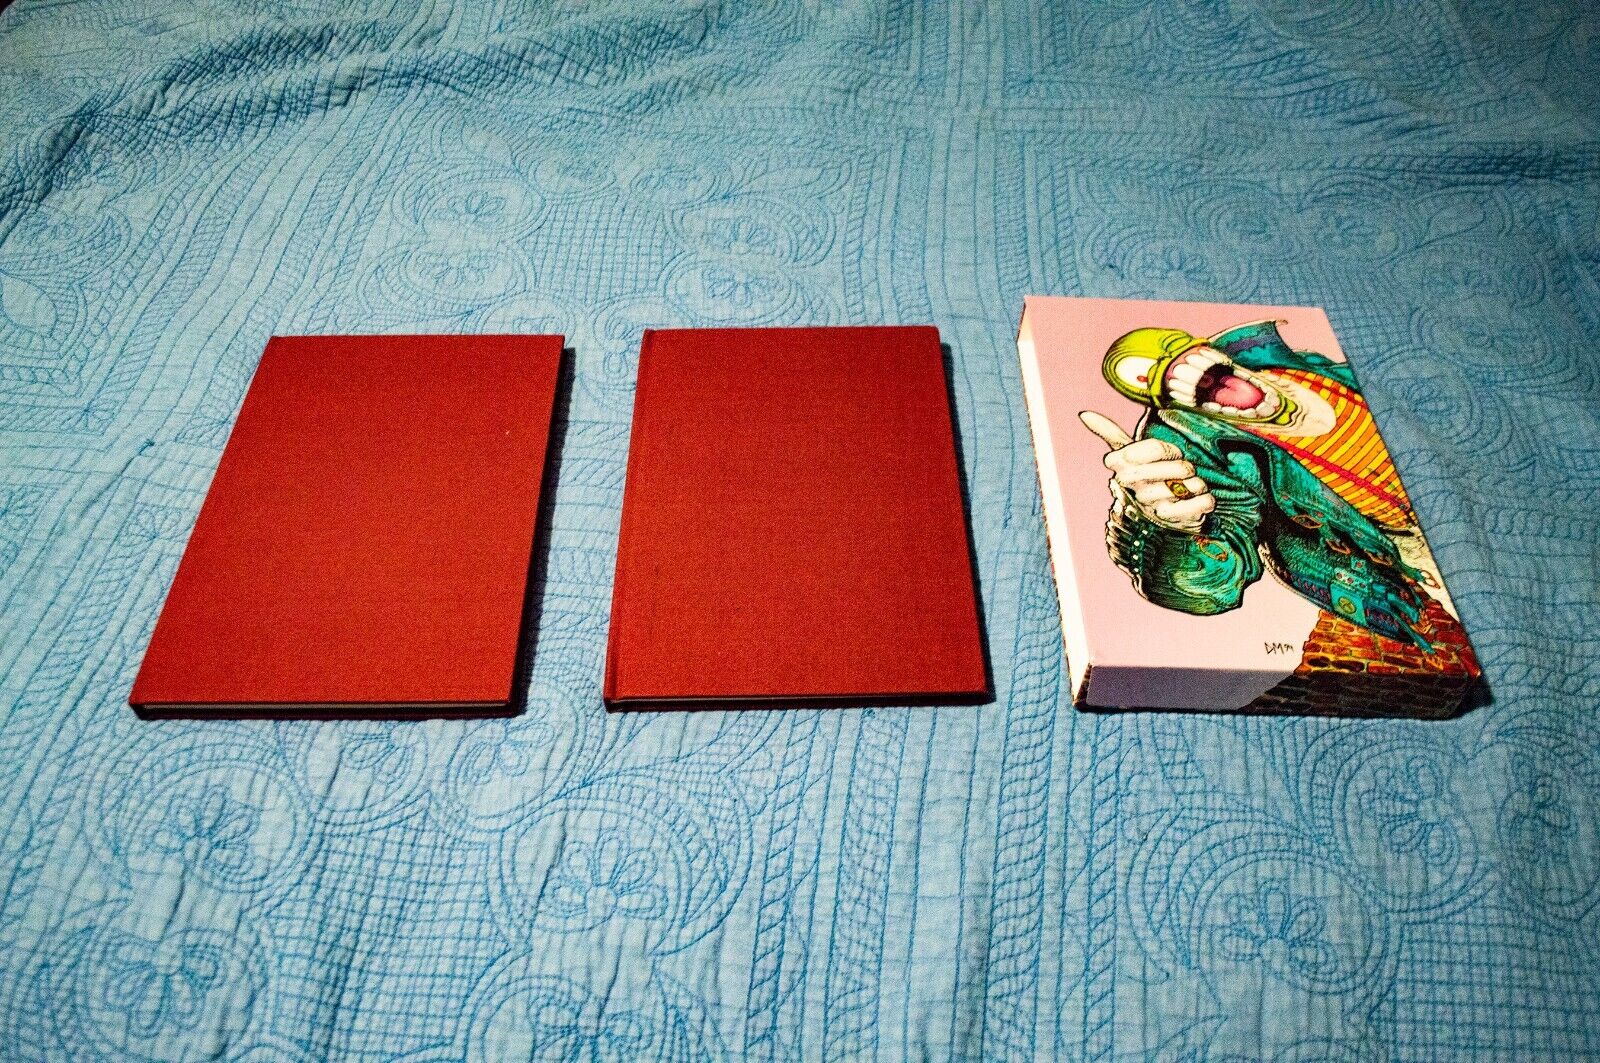 The Mask Limited Edition Hardcover Box Set With Slipcase - No Dust Jacket - OOP